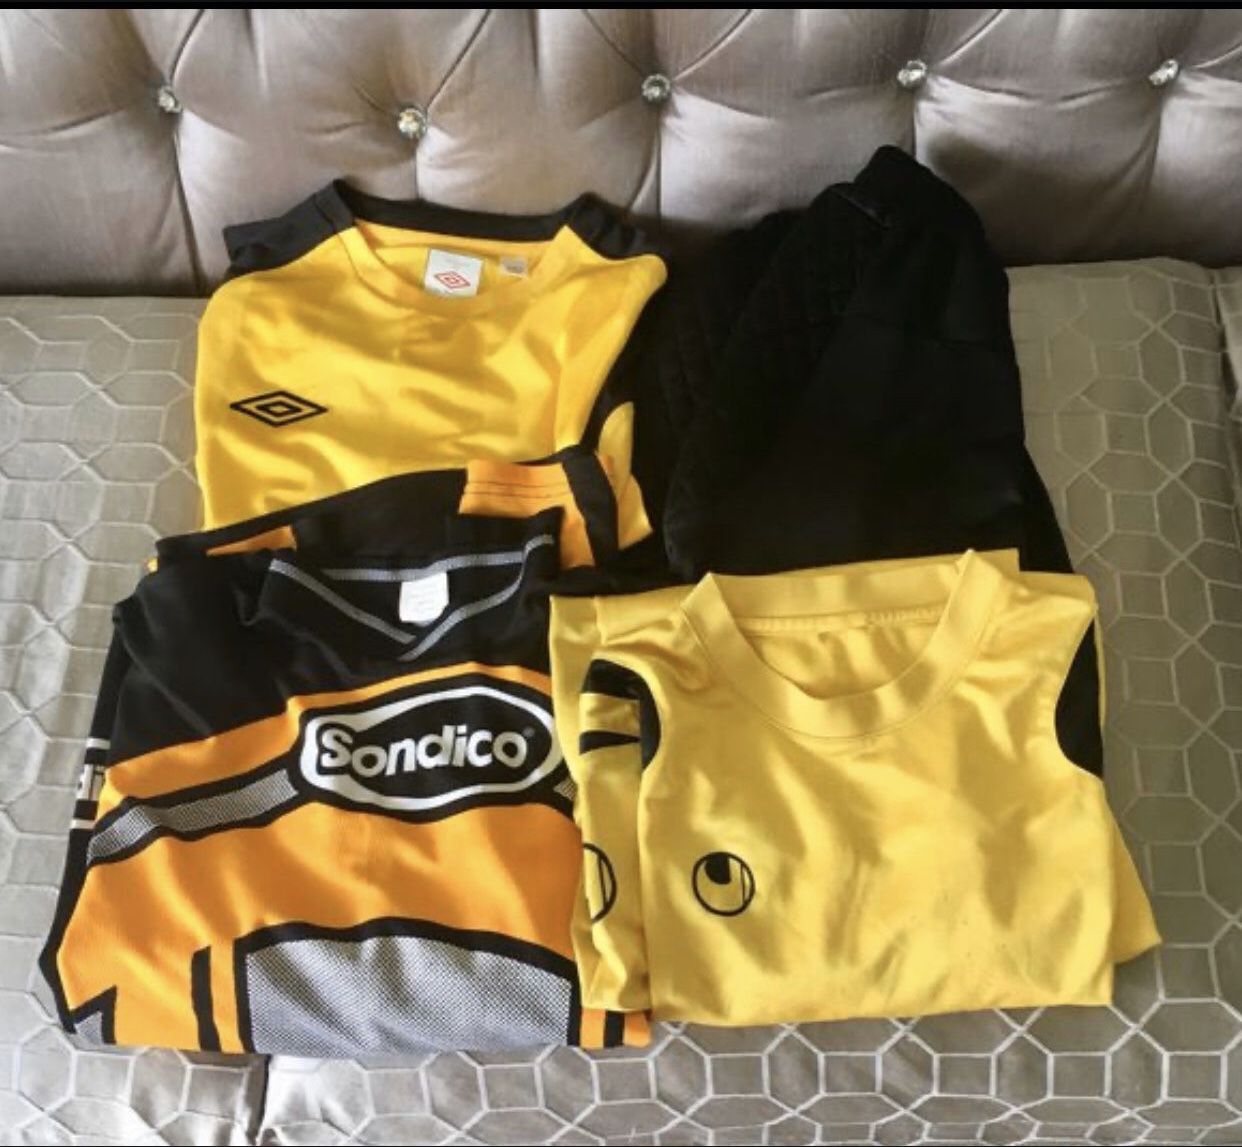 Goalkeeper pants and jersey size small and medium